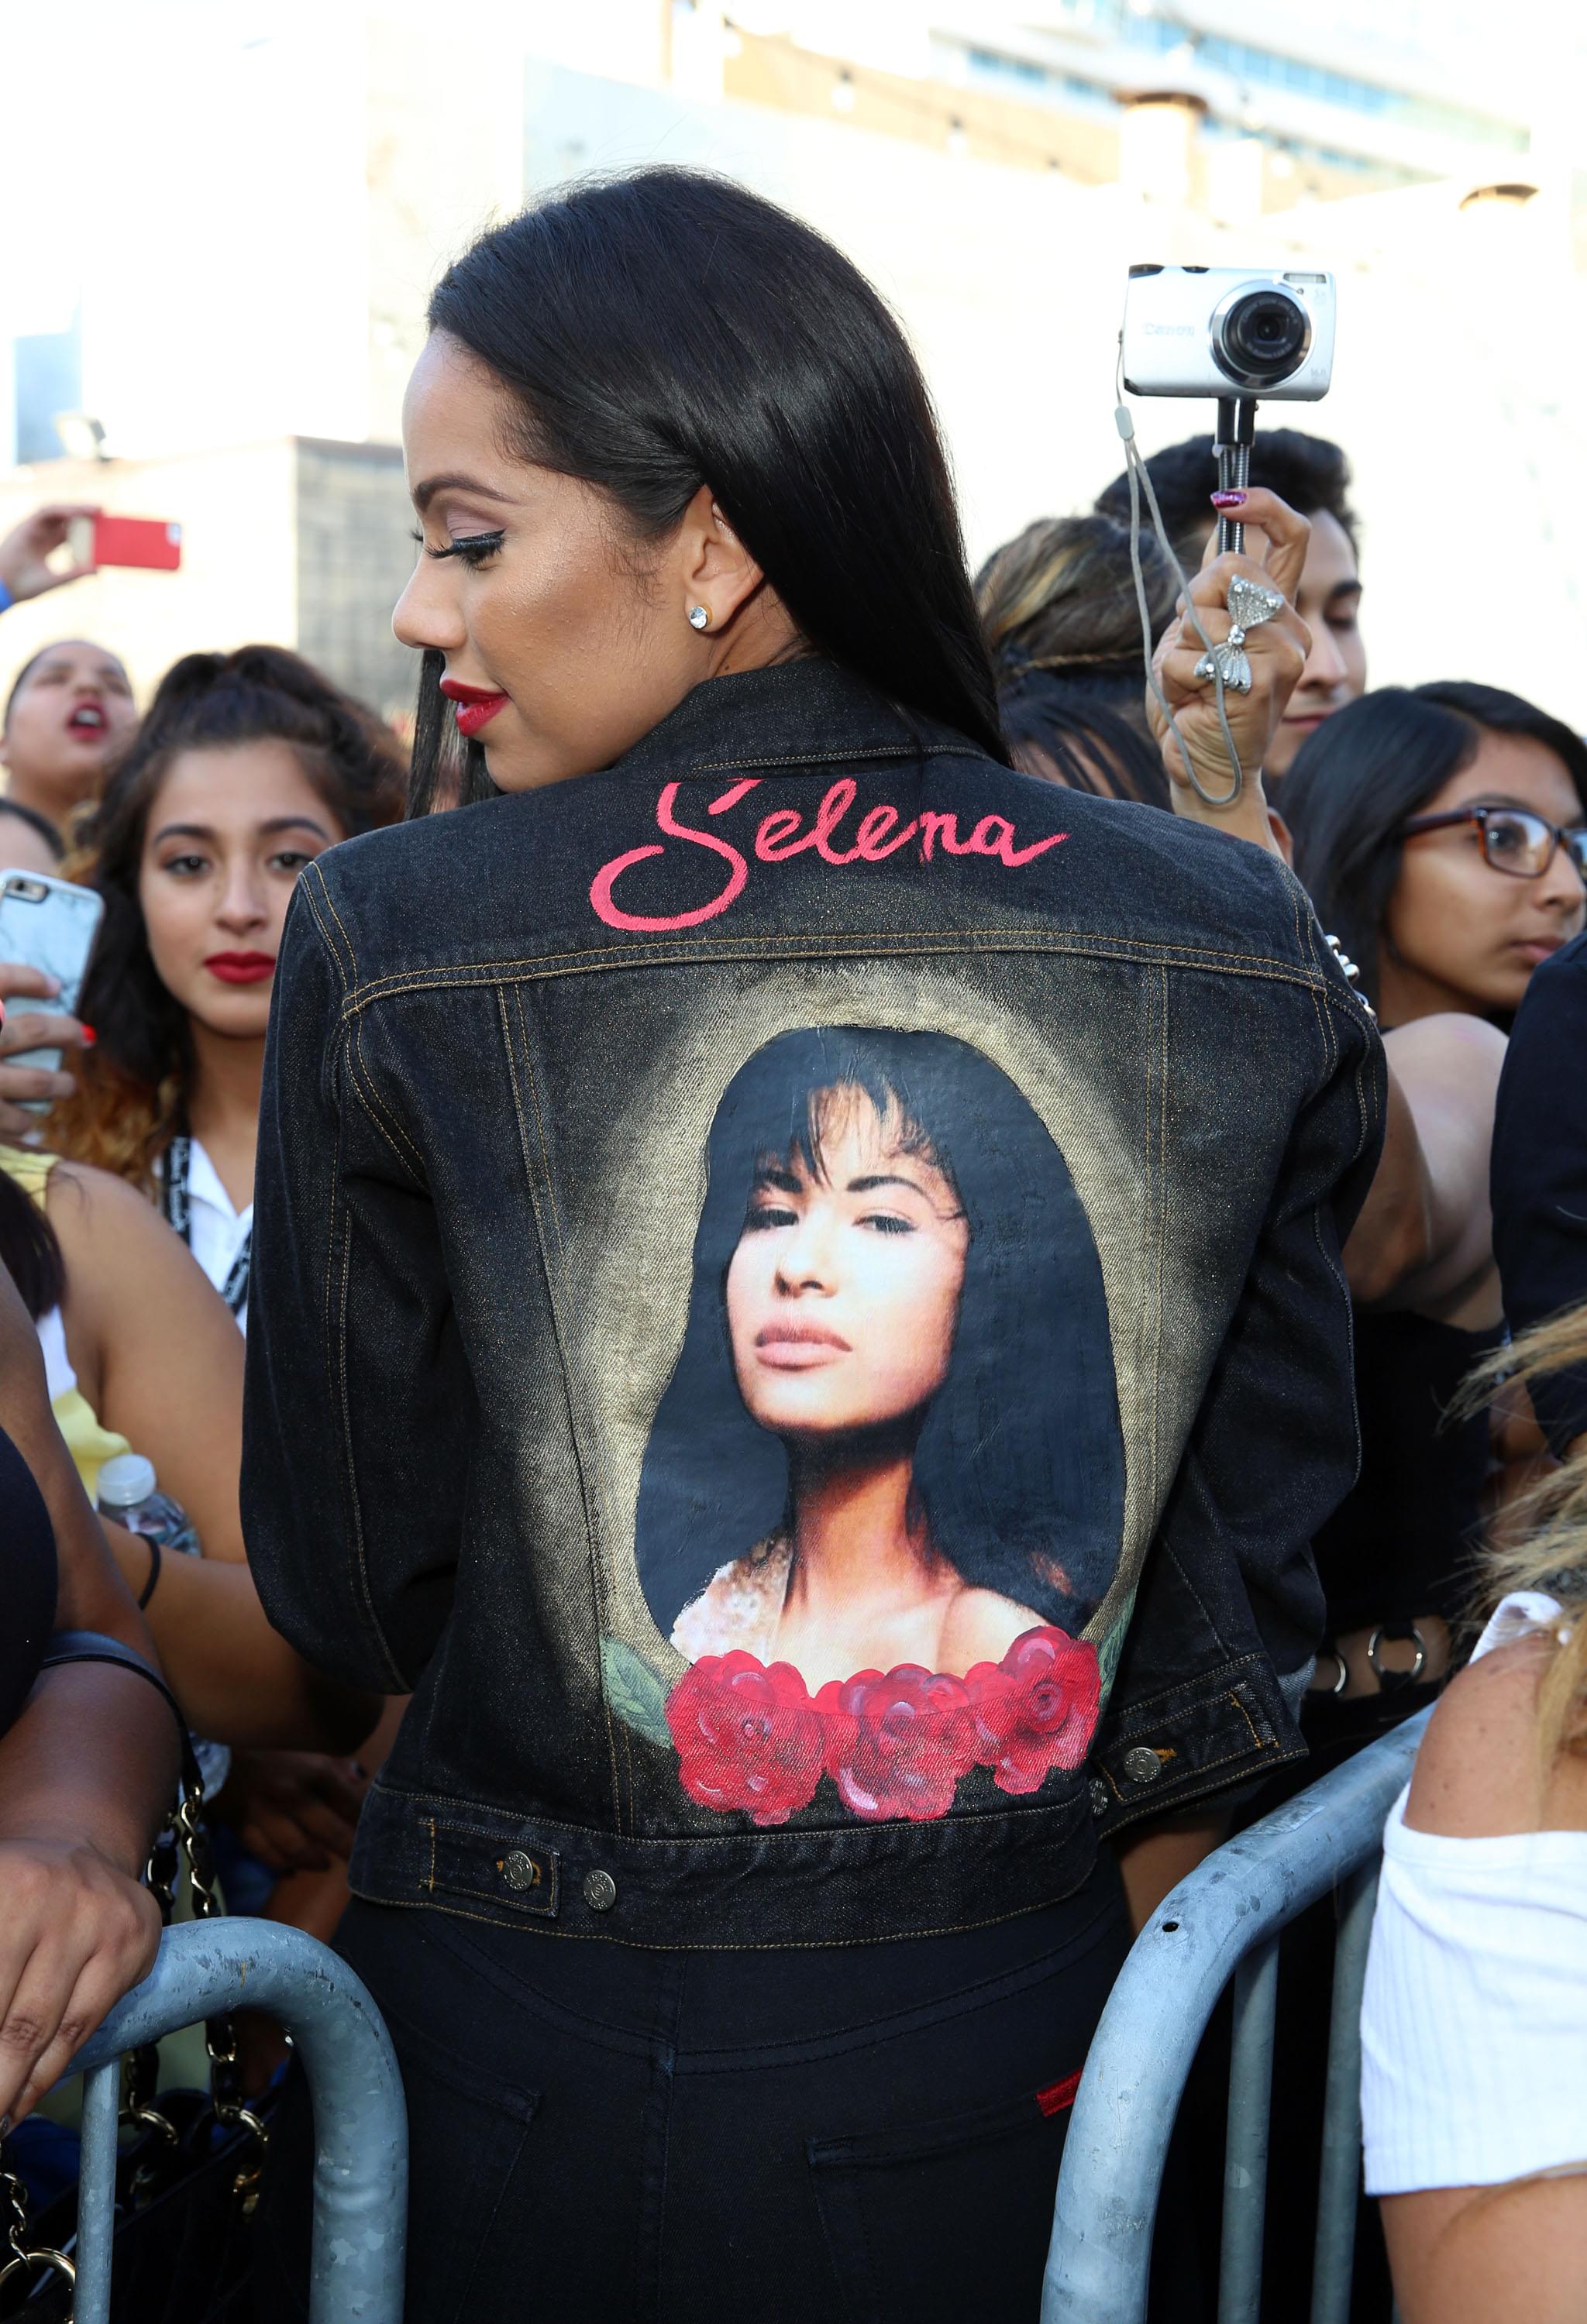 Selena’s Family to Celebrate 25th Anniversary of Singer’s Death With Commemorative Concert